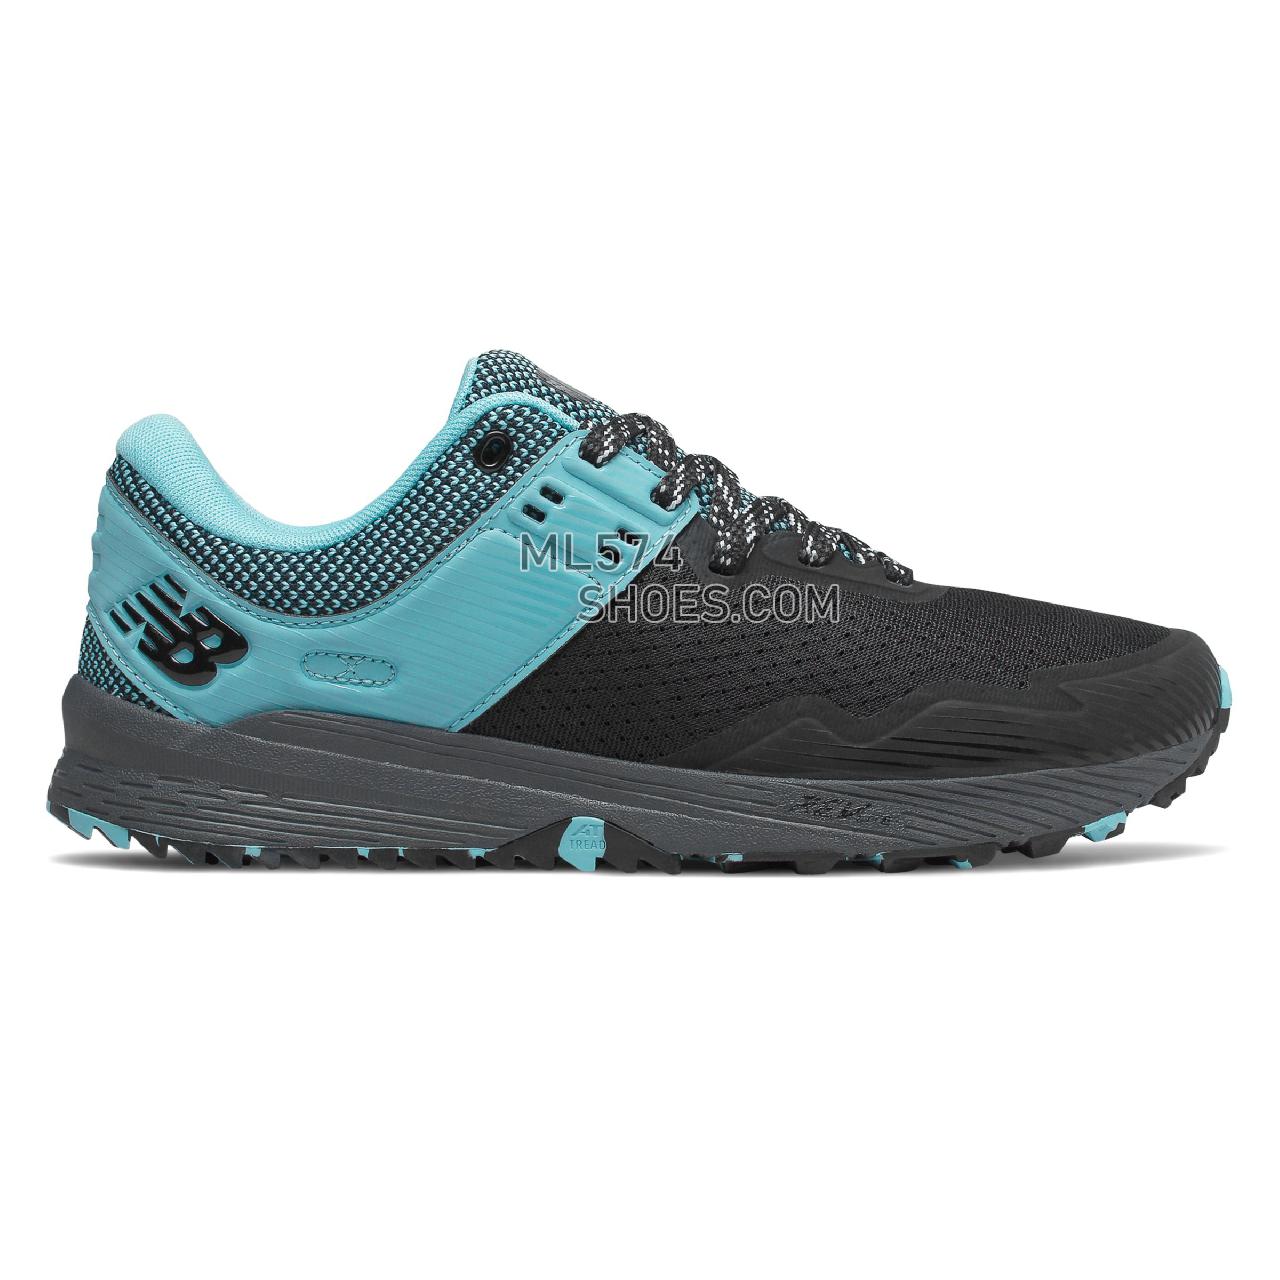 New Balance FuelCore NITREL v2 - Women's 2 - Running Black with Thunder and Enamel Blue - WTNTRLB2